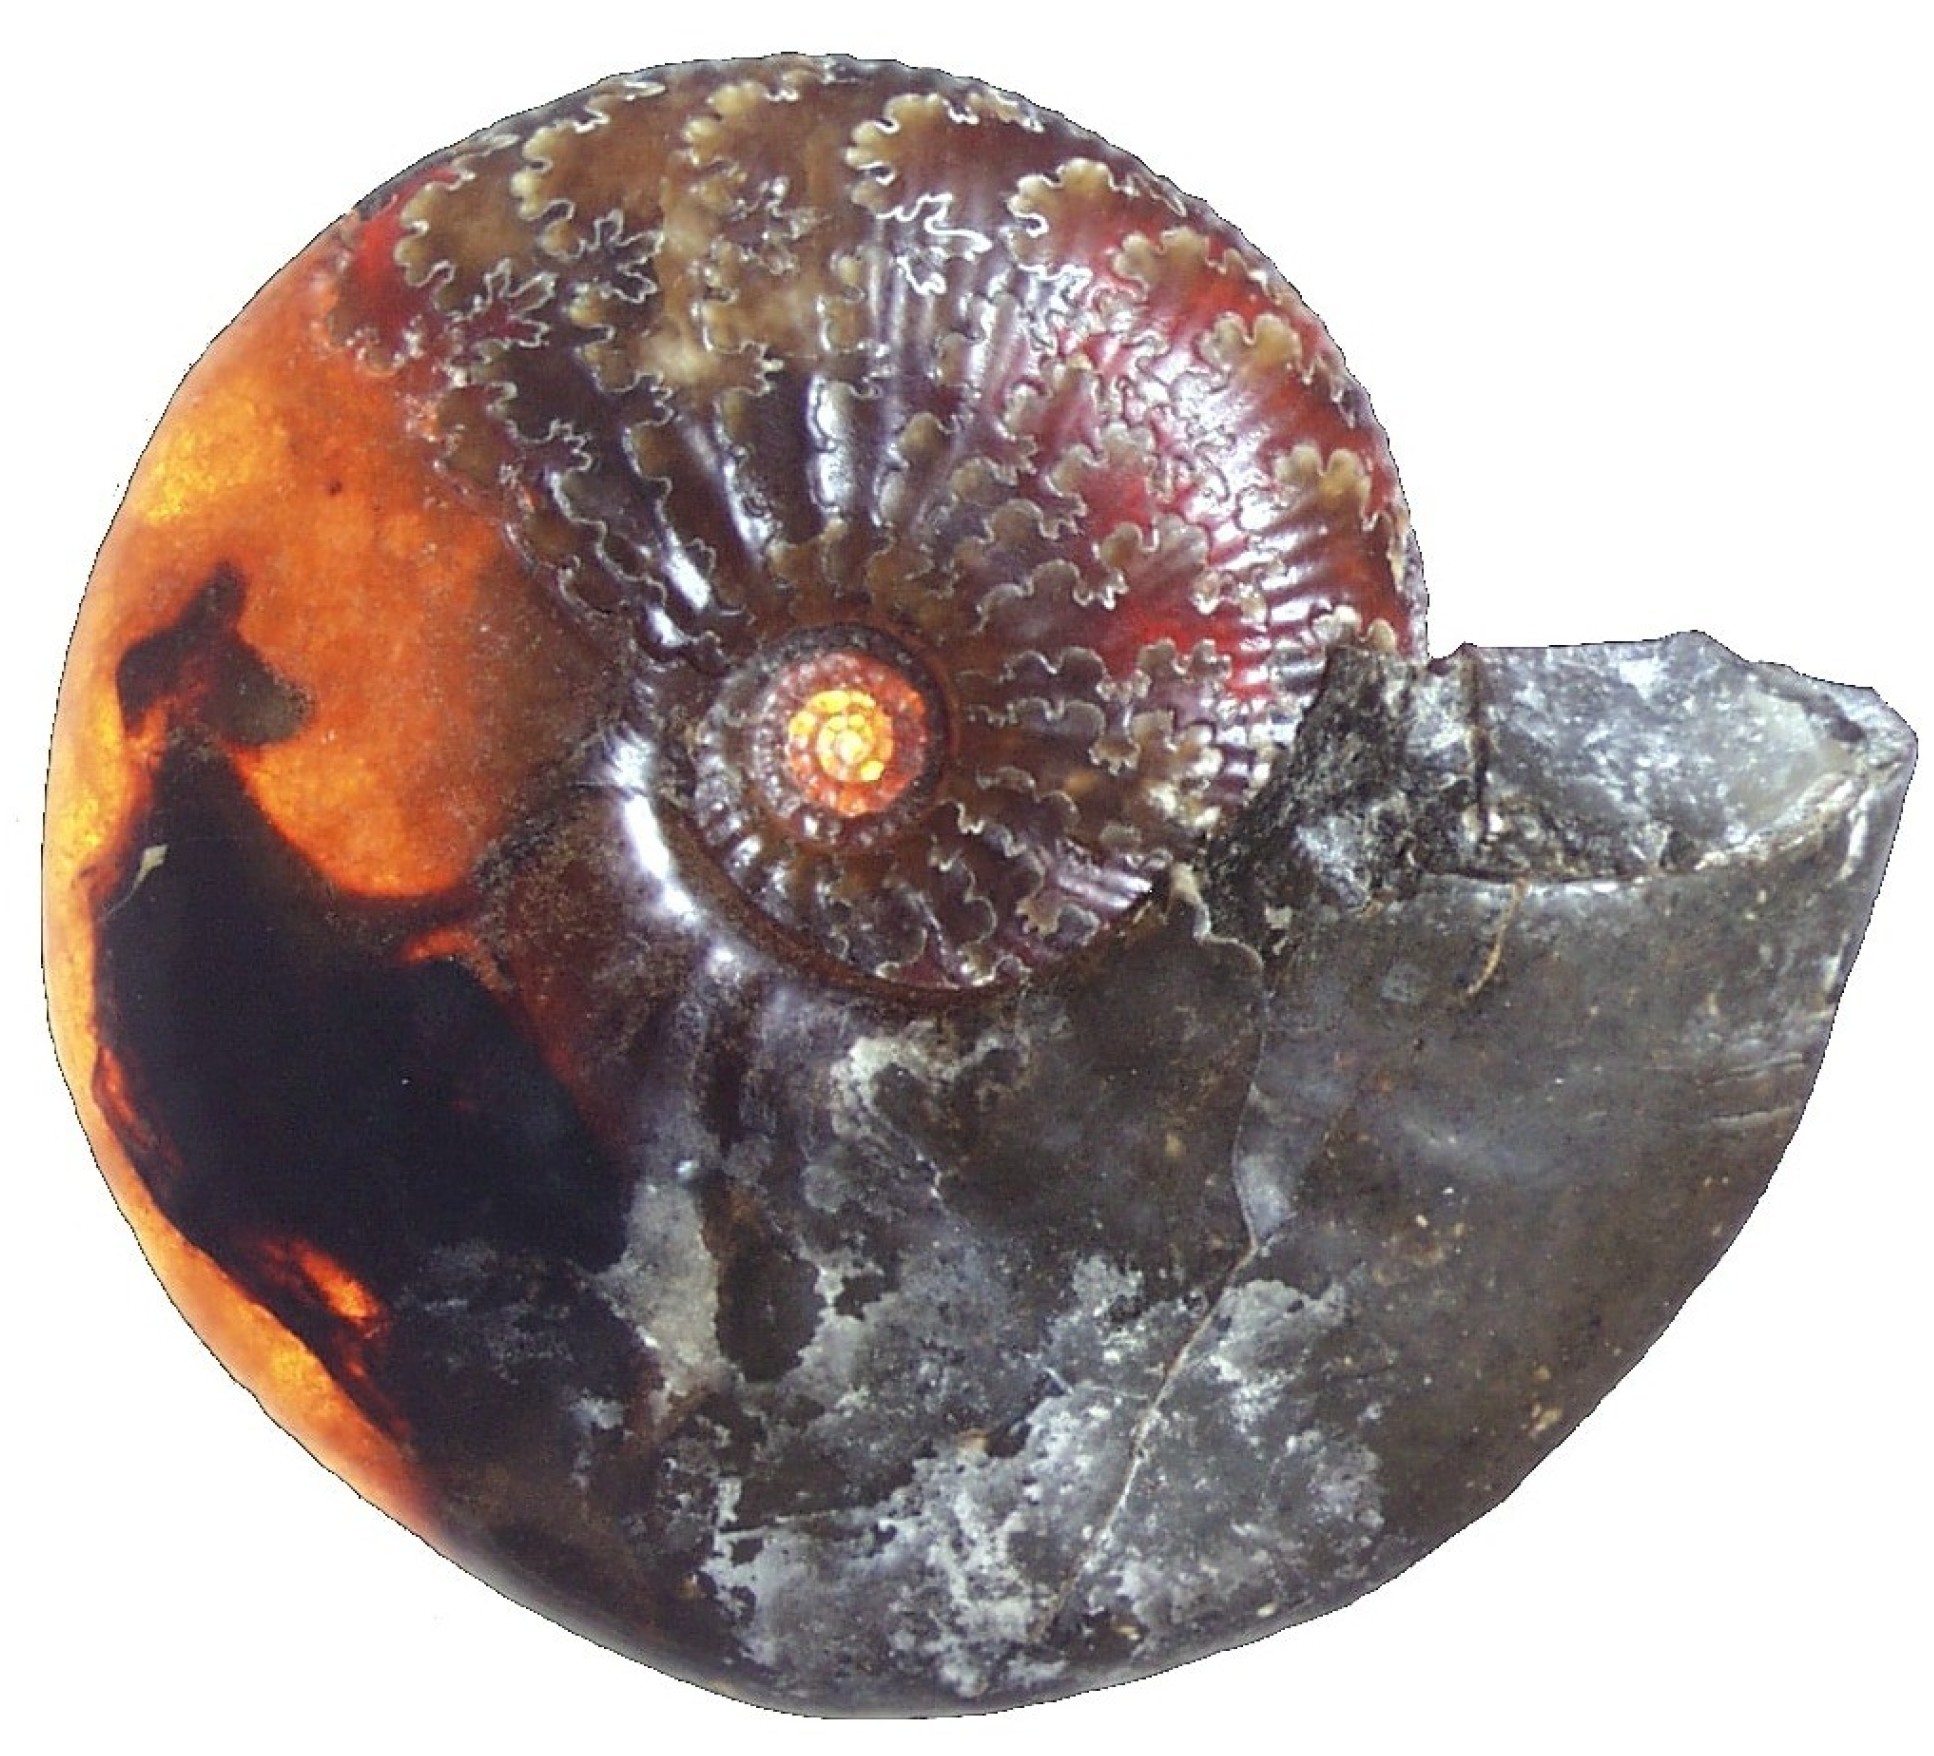 Photograph of the ammonite shell cast with a string backlight shining through the specimen. This light enables you to see the preserved internal organs (dark material on left against the yellow/orange colour of the ammonite infill)